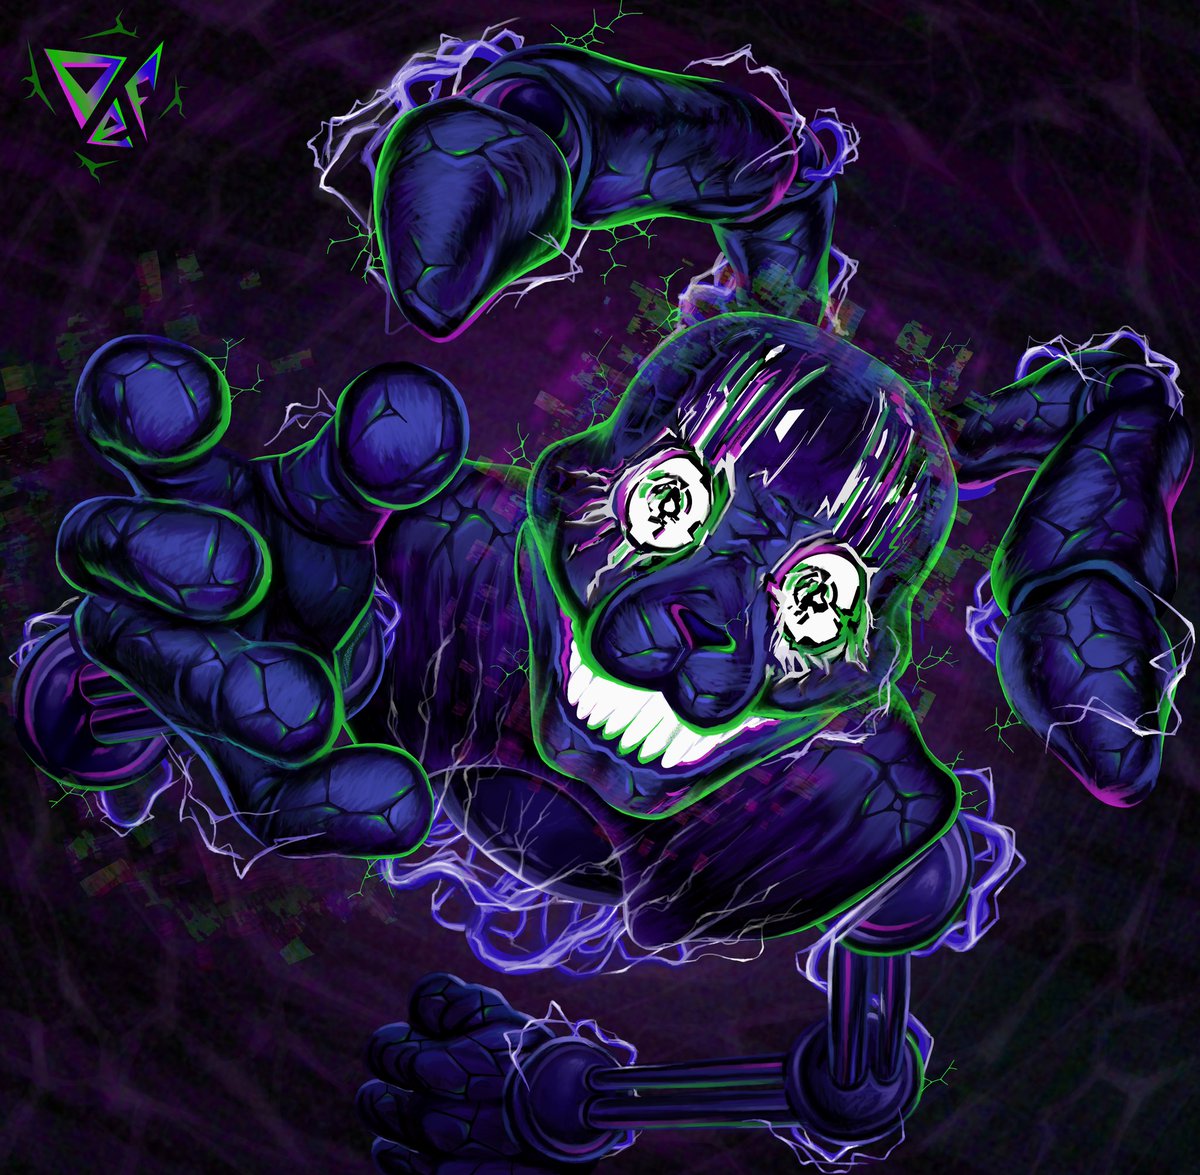 ~•🟩▪️🔷•÷ Shadow GlitchTrap ÷•🔷▪️🟩•~
 Here comes my FNAF SB DLC (Ruin) art!
 The work was not long but interesting, I hope you enjoy it.  🙃

#FNaF
#Glitchtrap
#Mimic
#WilliamAfton
#Art
#Drawing
#ShadowGlitchTrap
#securitybreach
#Ruin